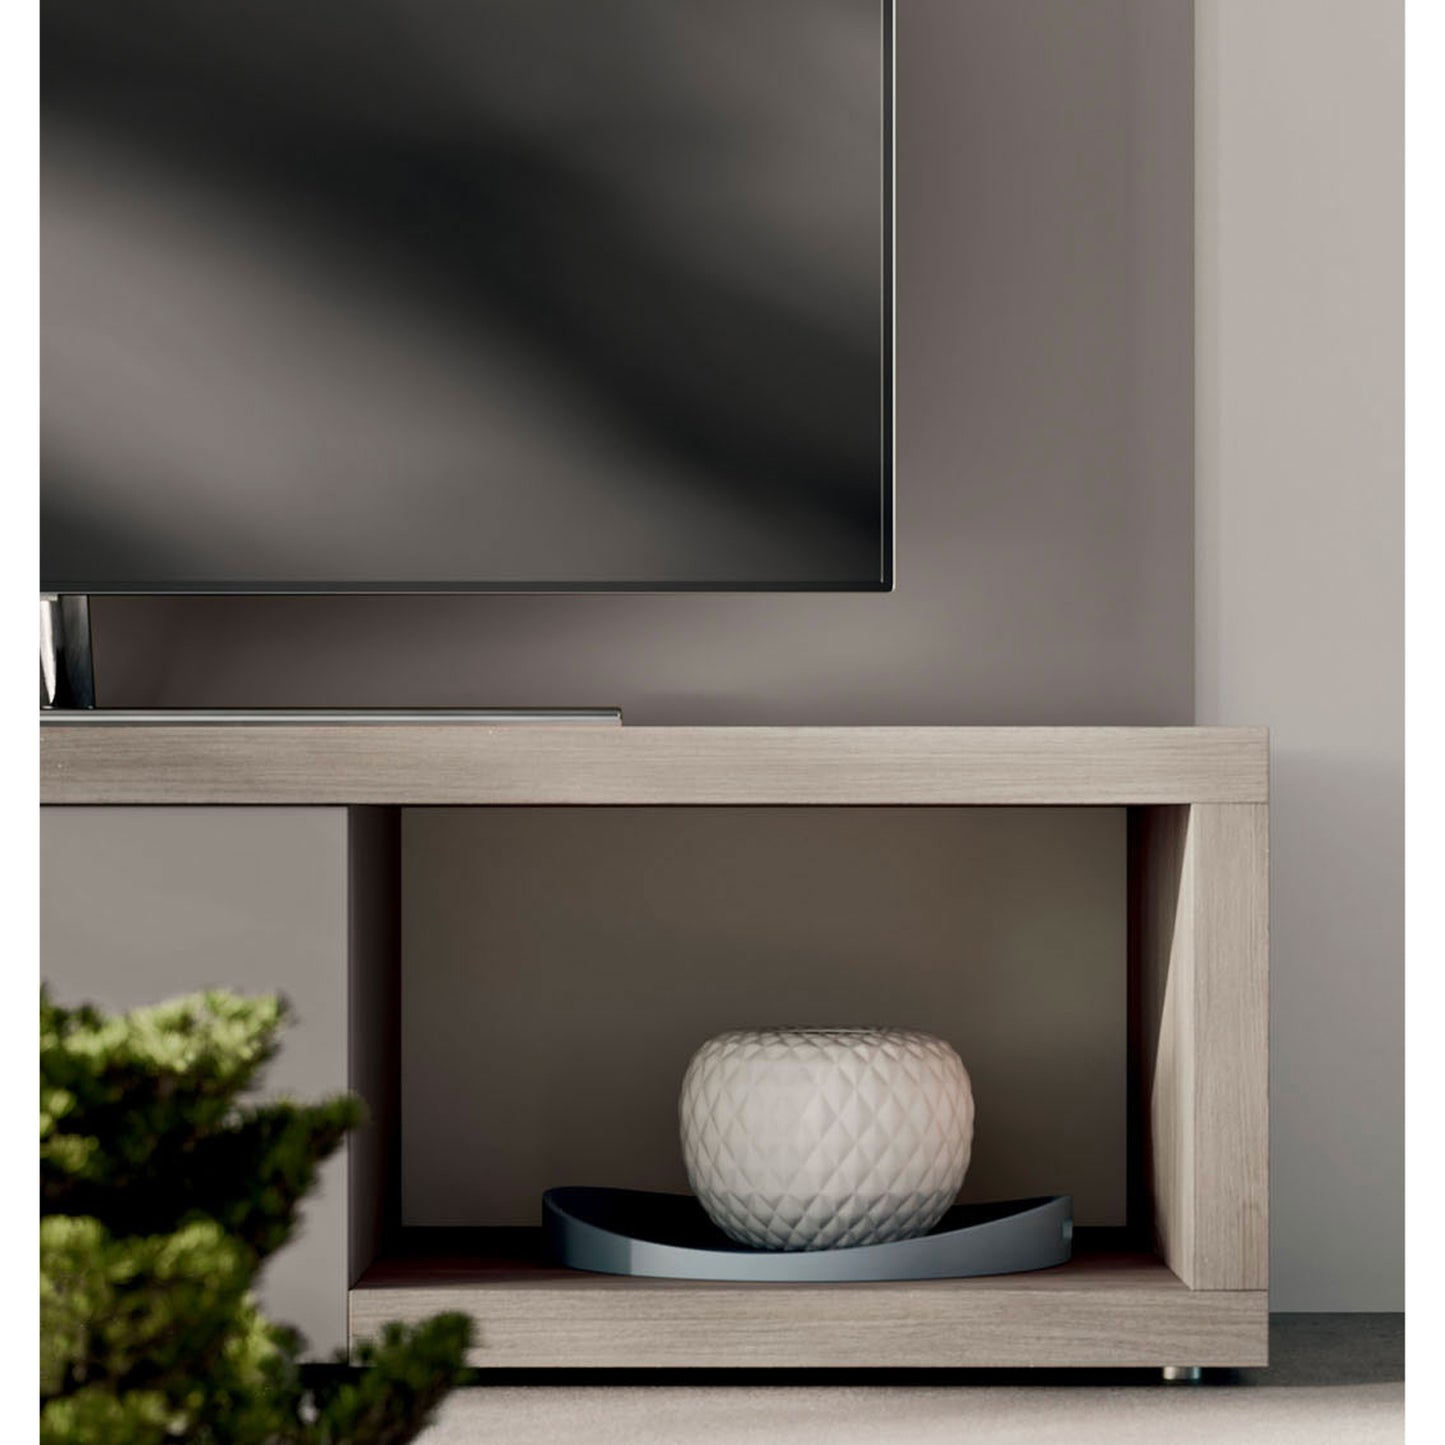 Light Day 23 TV media unit with storage by Orme Design